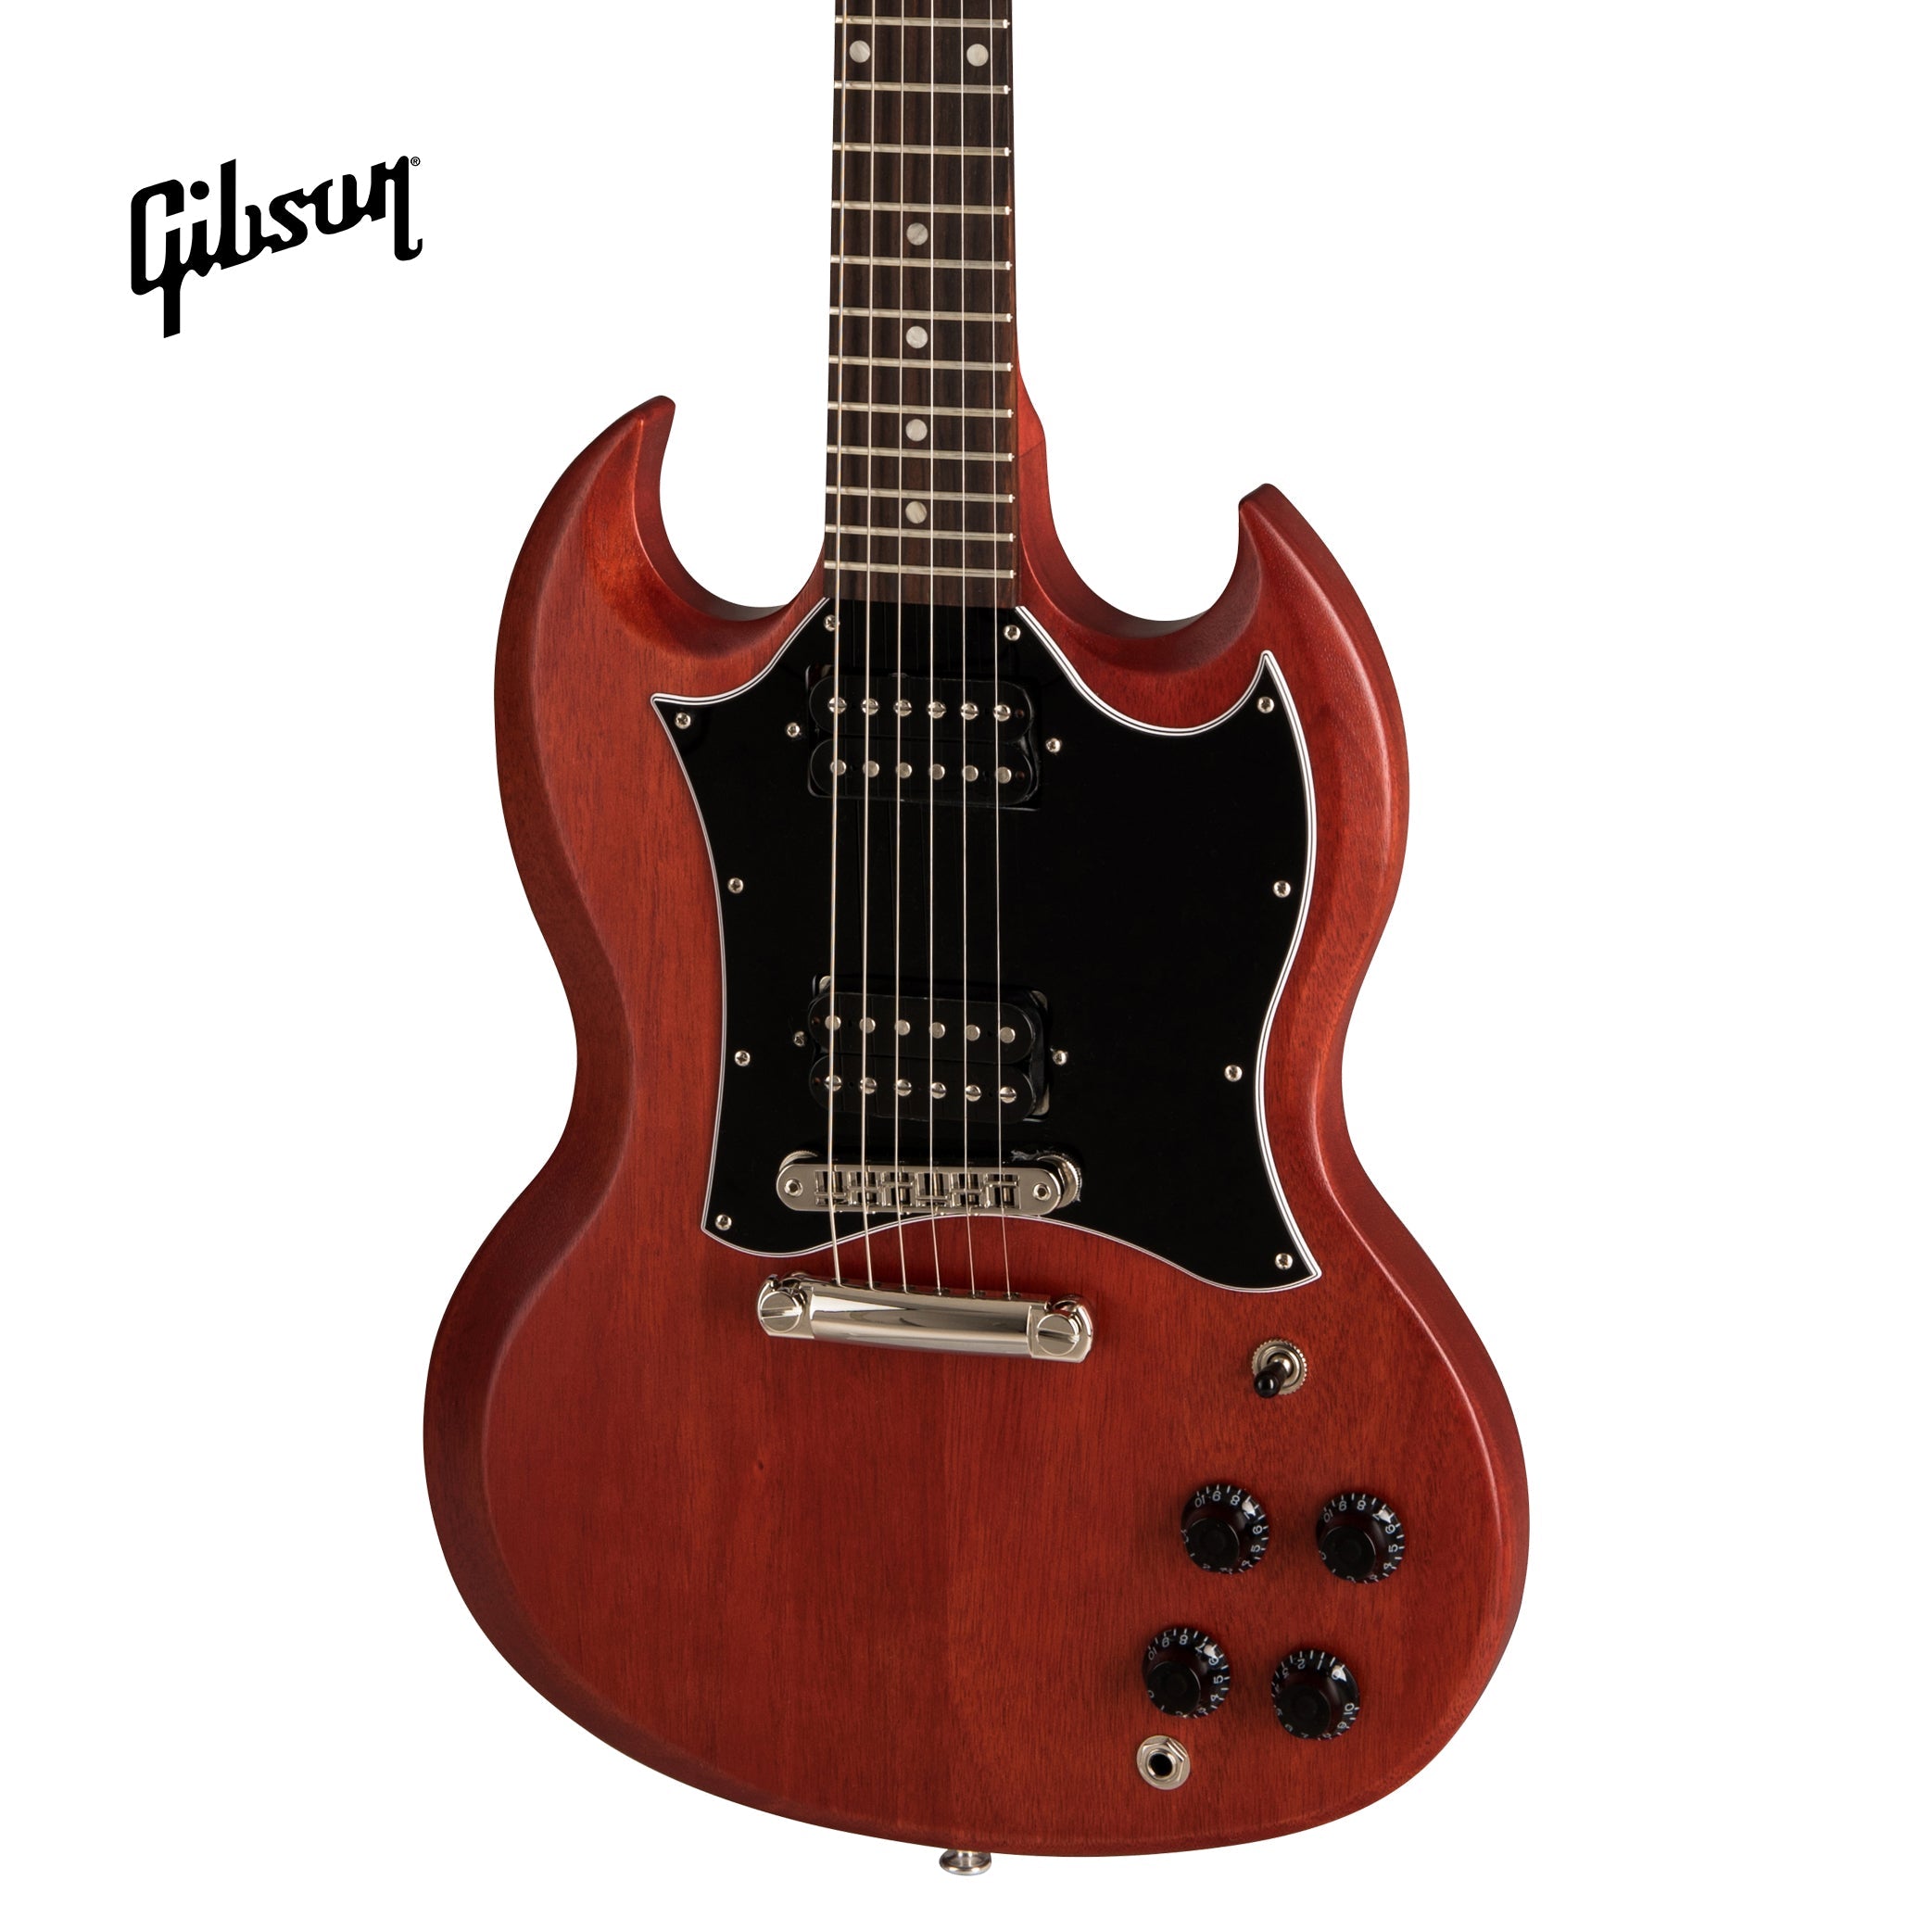 GIBSON SG TRIBUTE ELECTRIC GUITAR - VINTAGE CHERRY SATIN